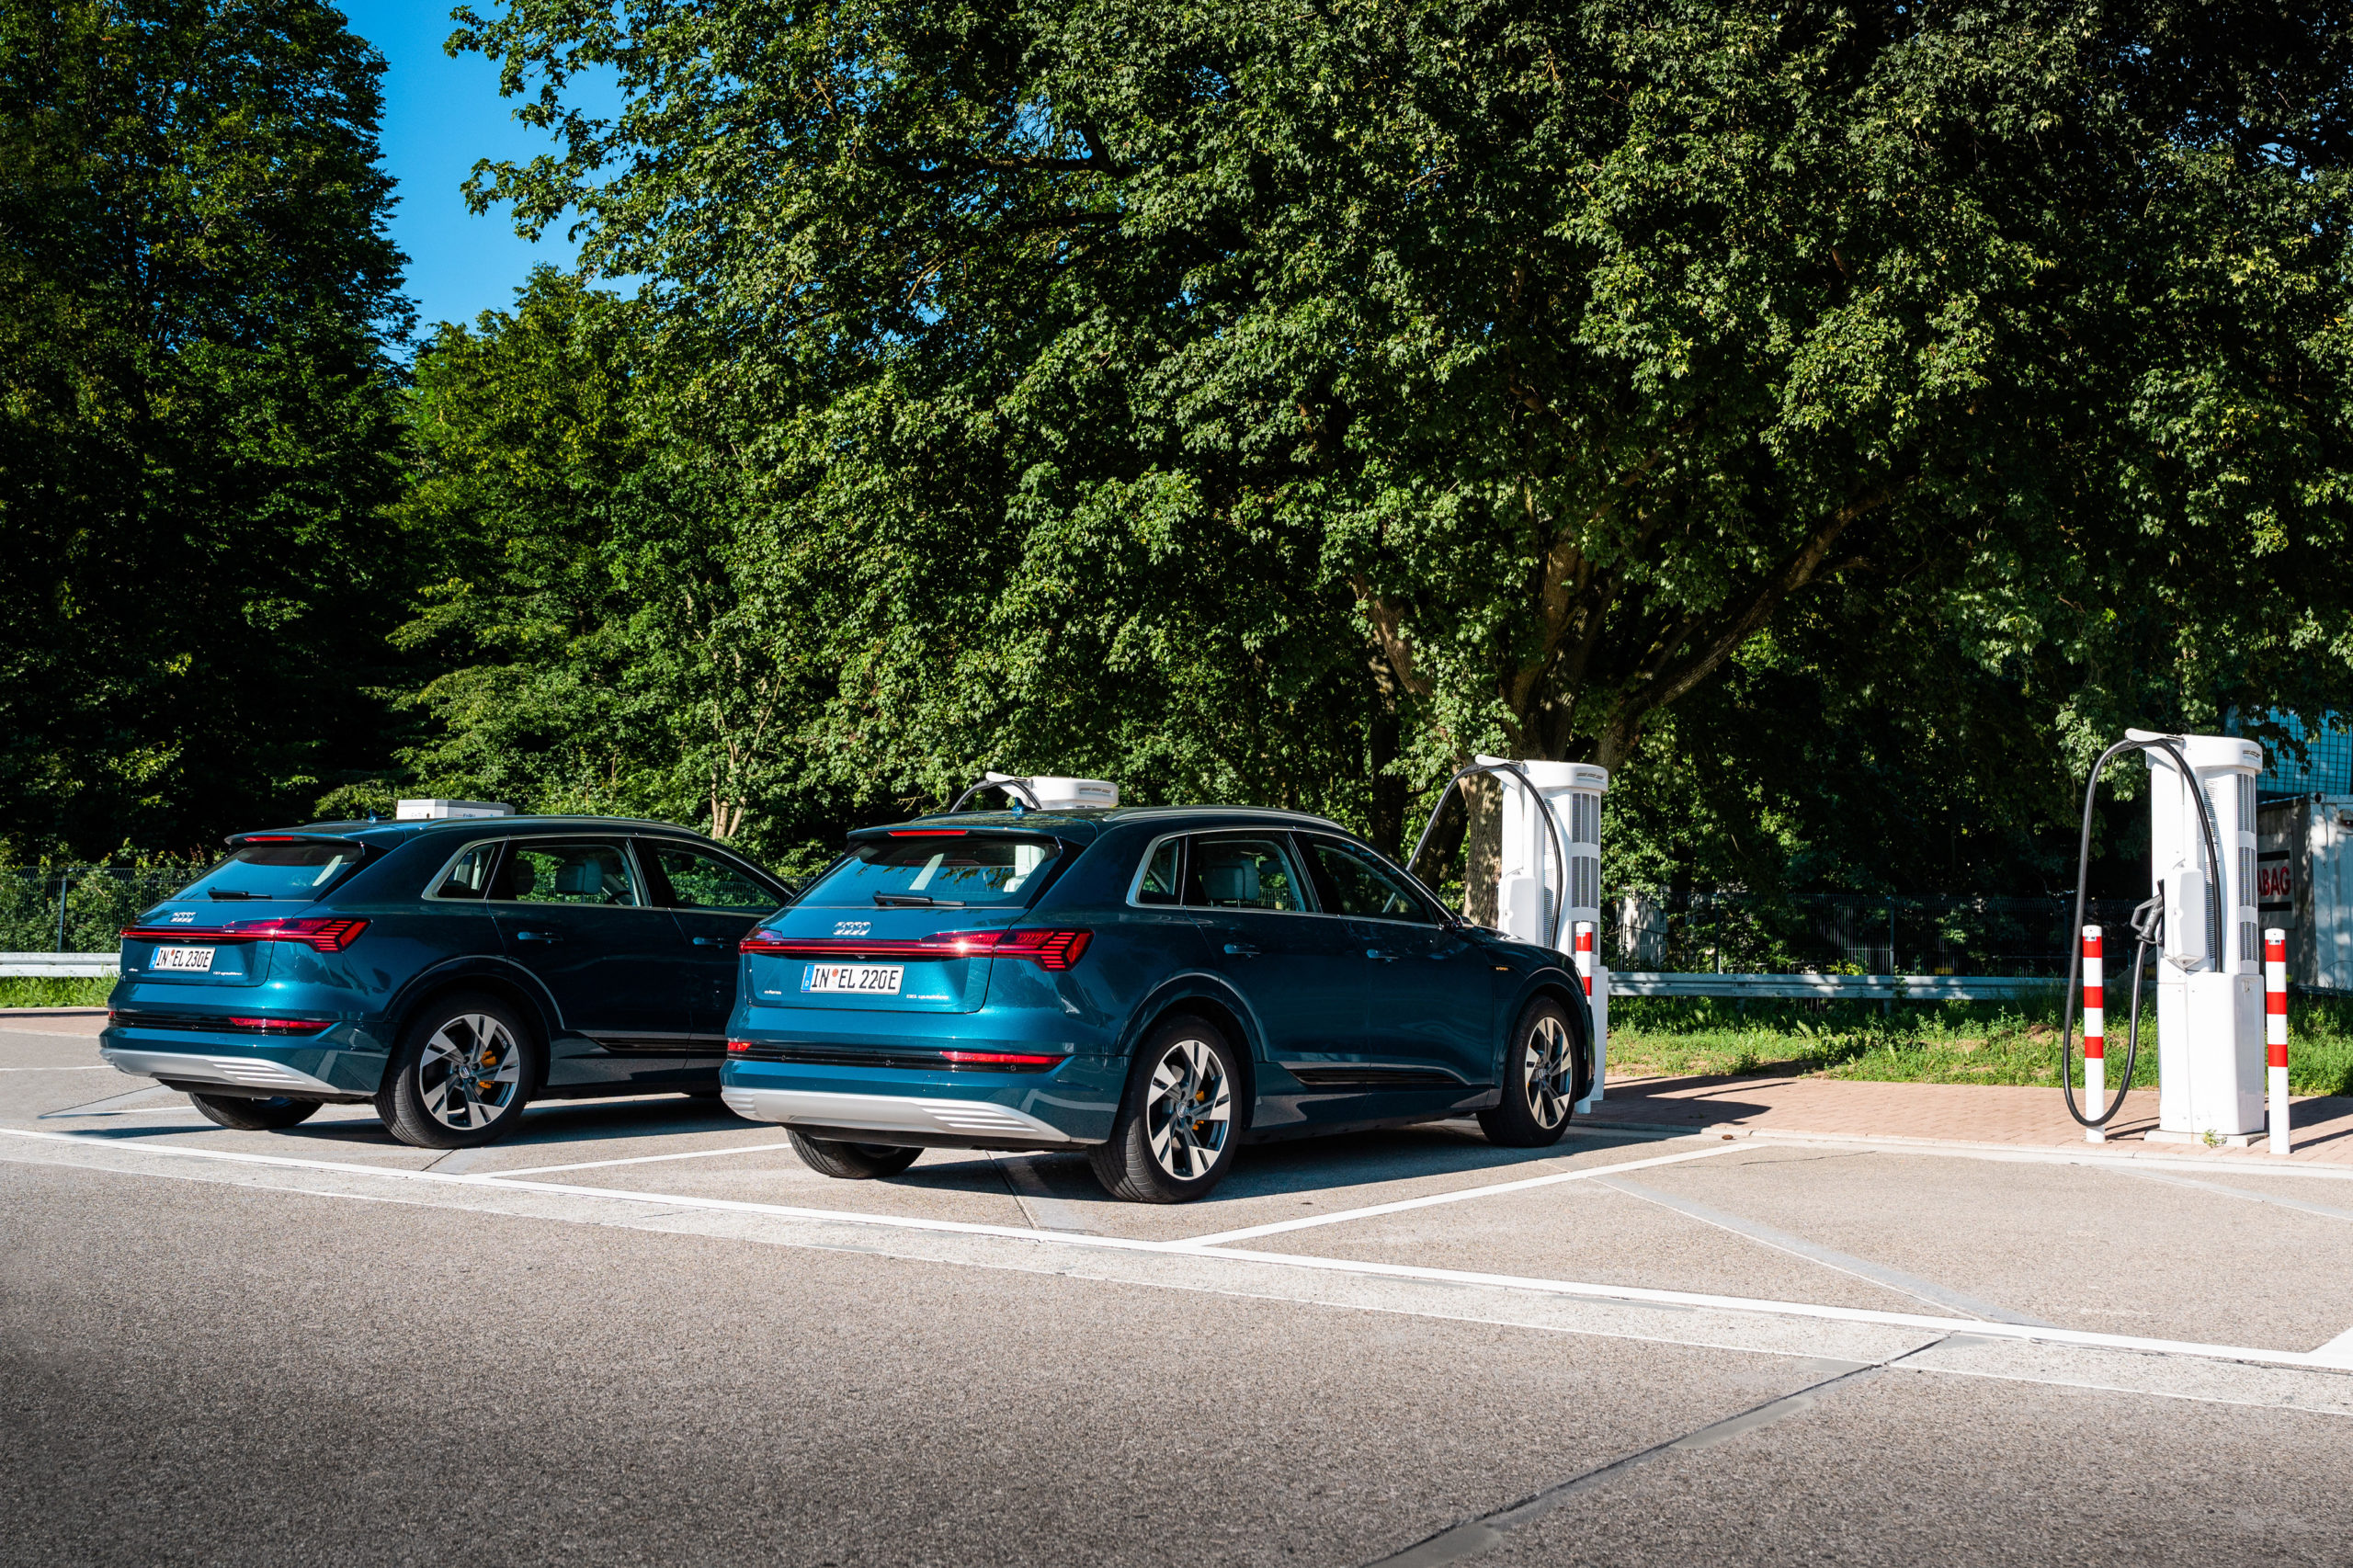 Arval: ‘number of EV company cars doubled in 2020’